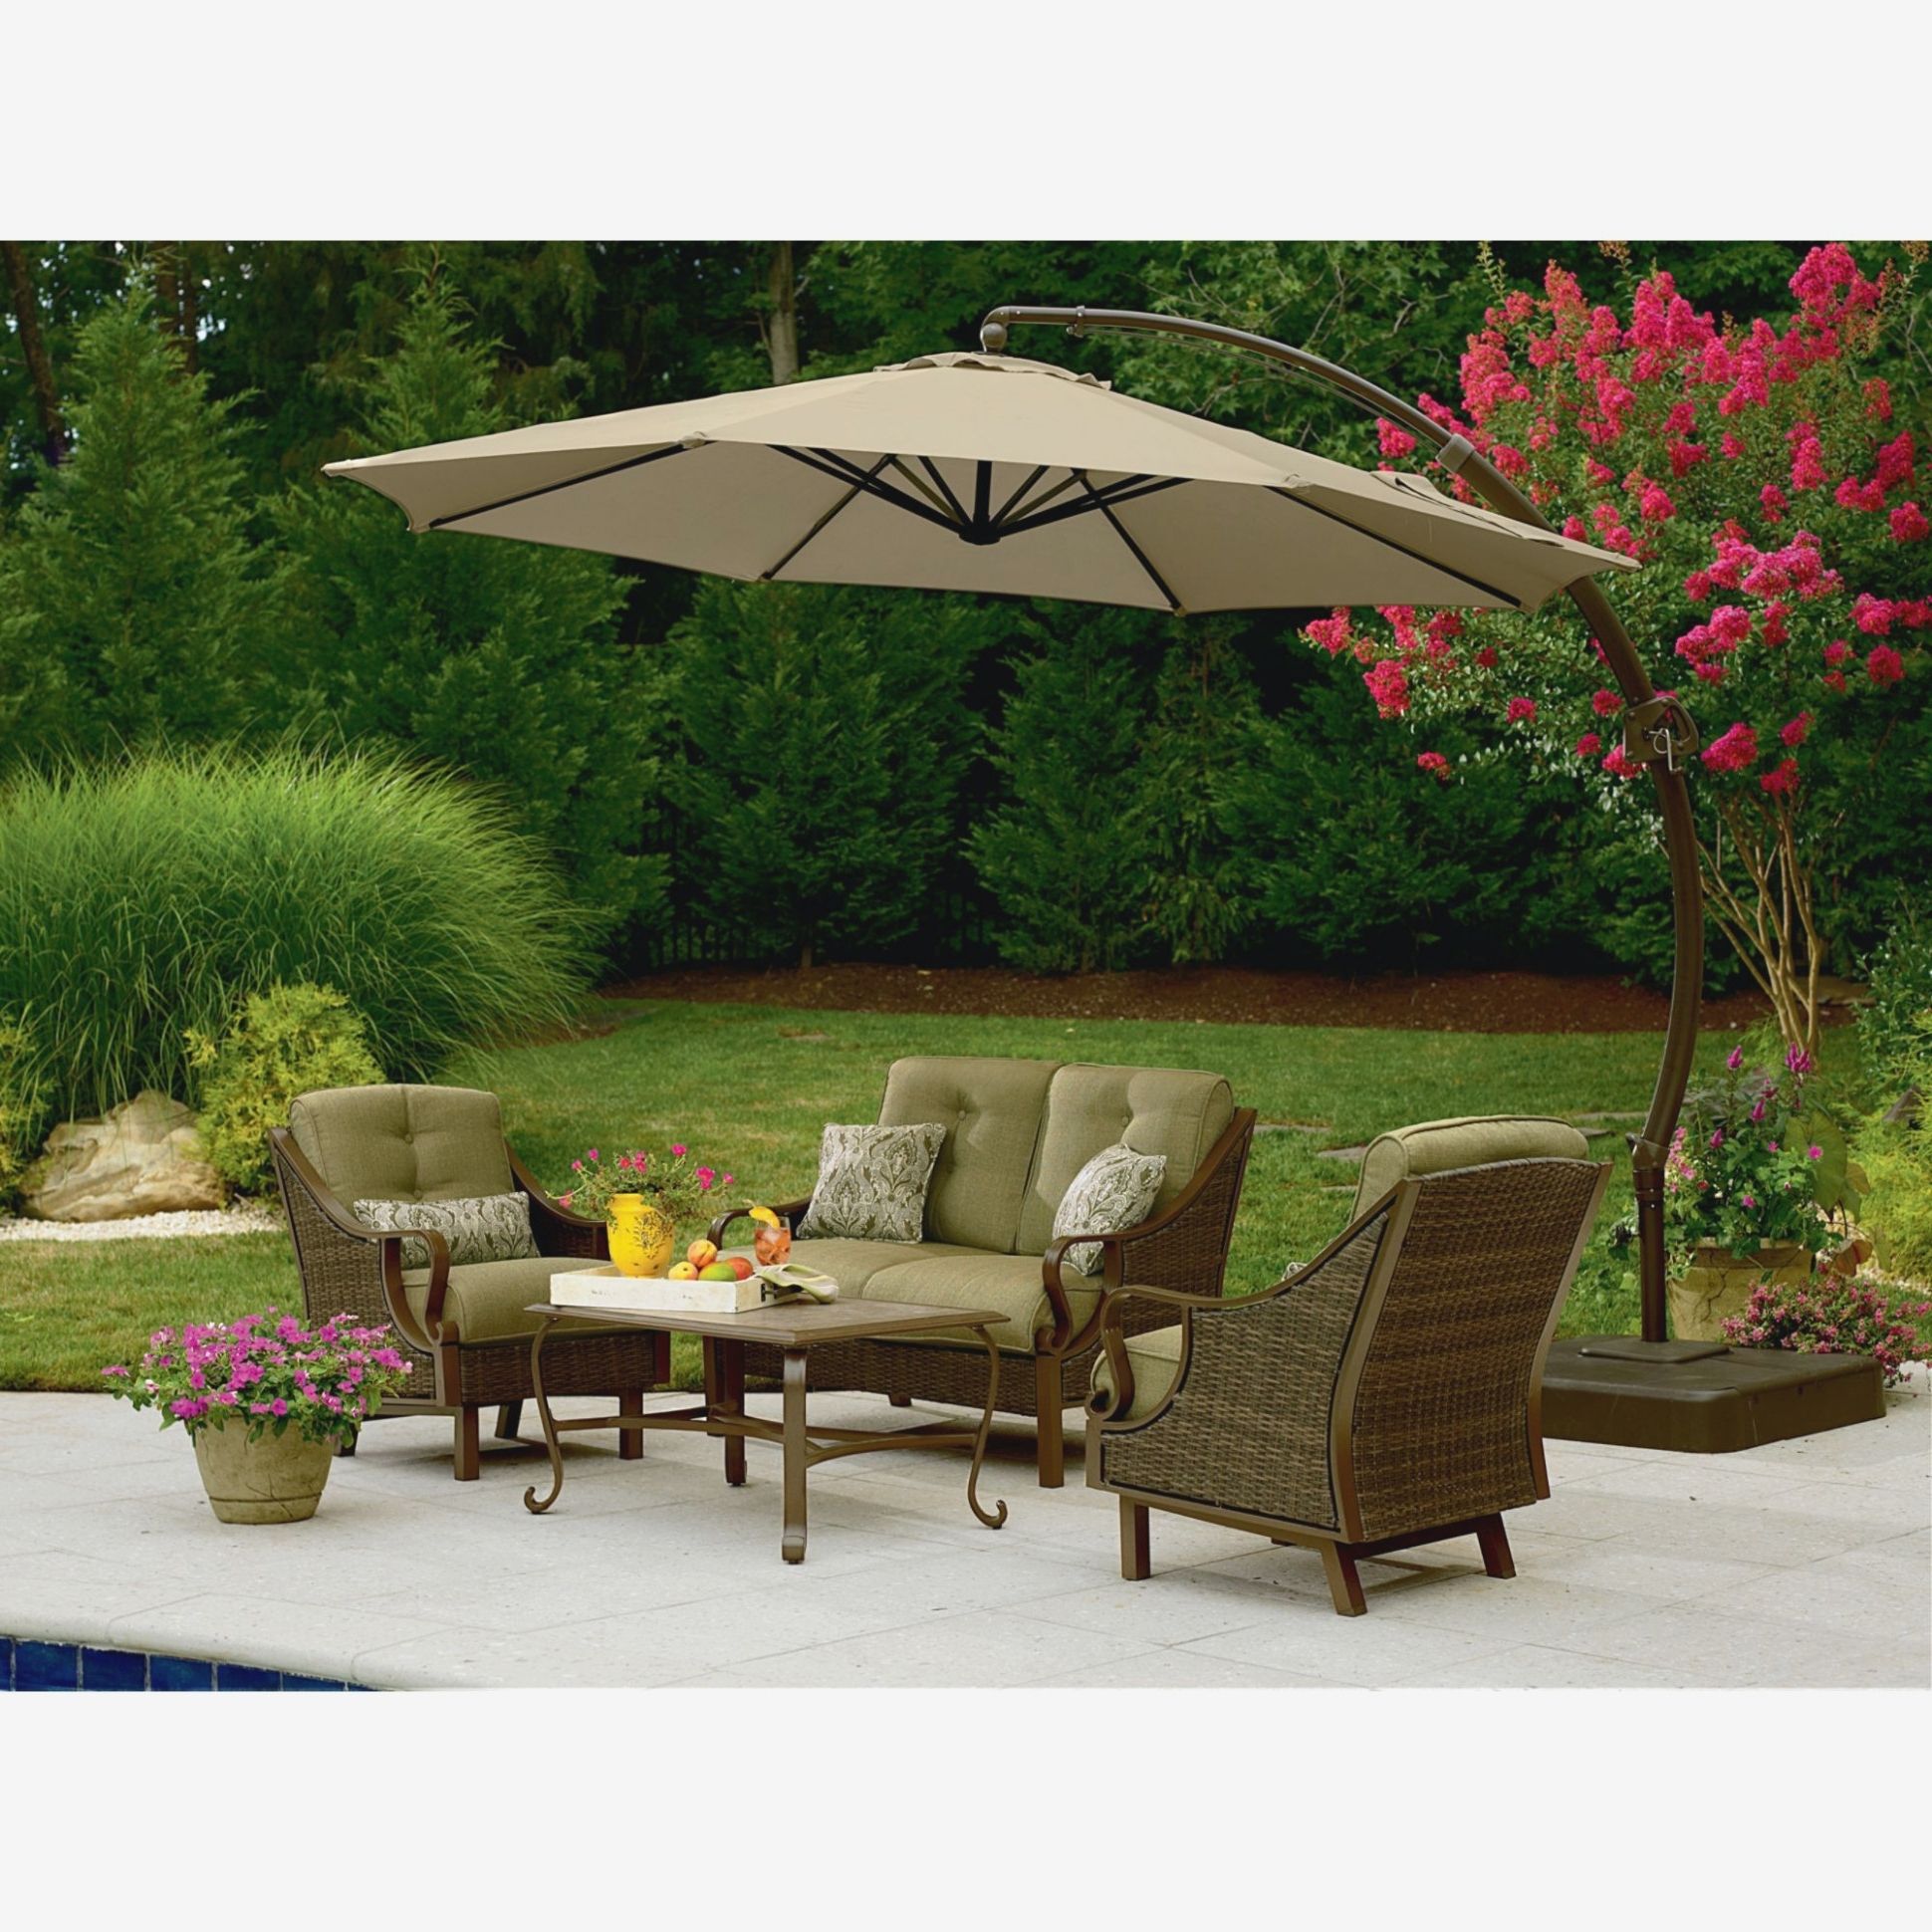 Sears Patio Umbrellas Regarding Recent Steel Round Offset Umbrella: Stay Coolthe Pool At Sears . (View 1 of 20)